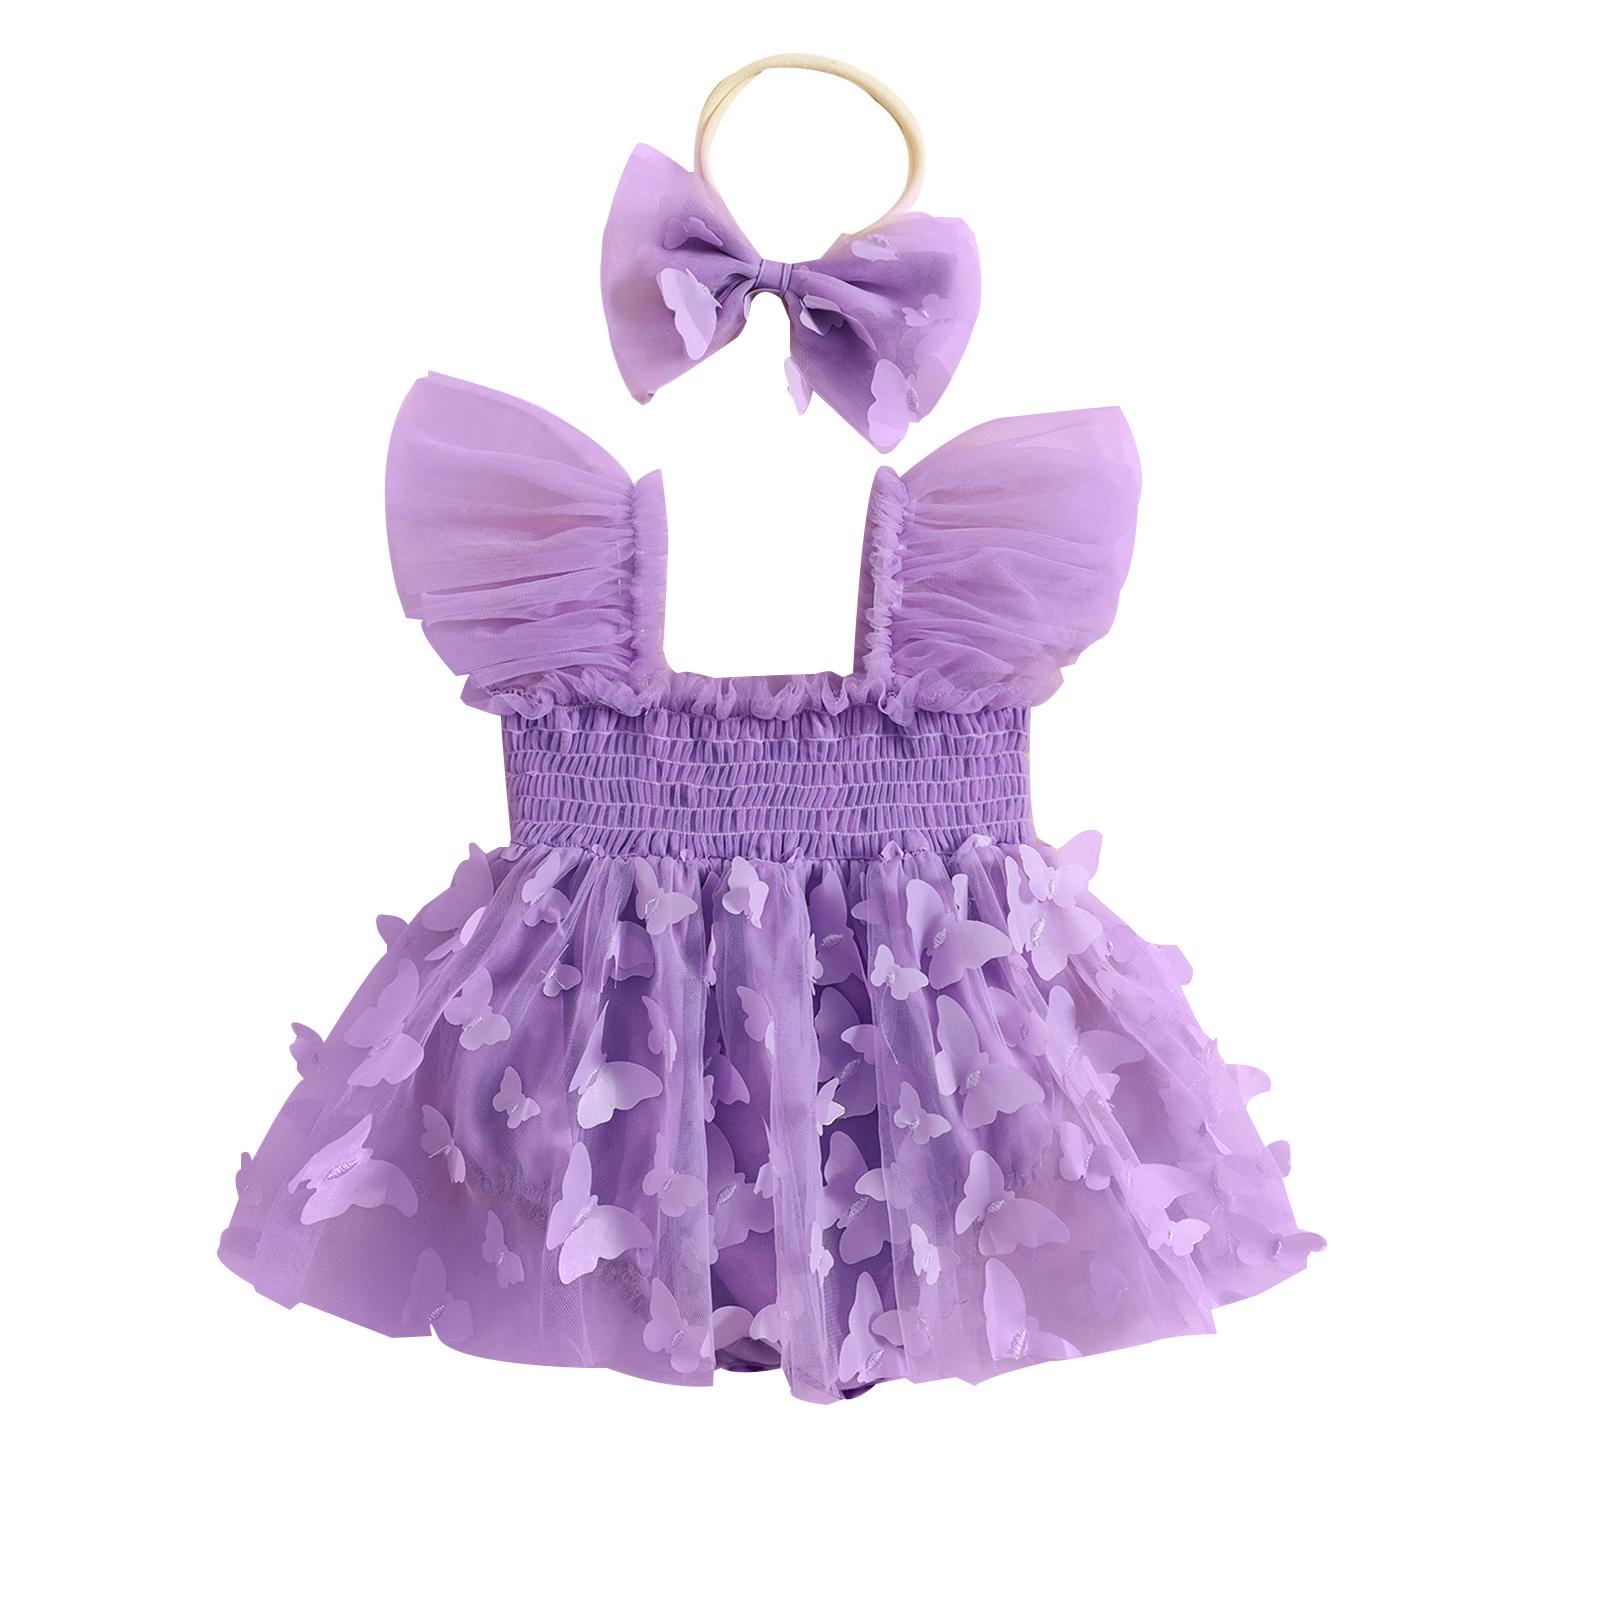 Little Fashionistas Infant Girl Romper Dress Butterfly Decor Fly Sleeve Ruched Mesh Skirt 3 6 12 18 24 Months Hem Jumpsuits Newborn Clothes Baby Bodysuits with Headband